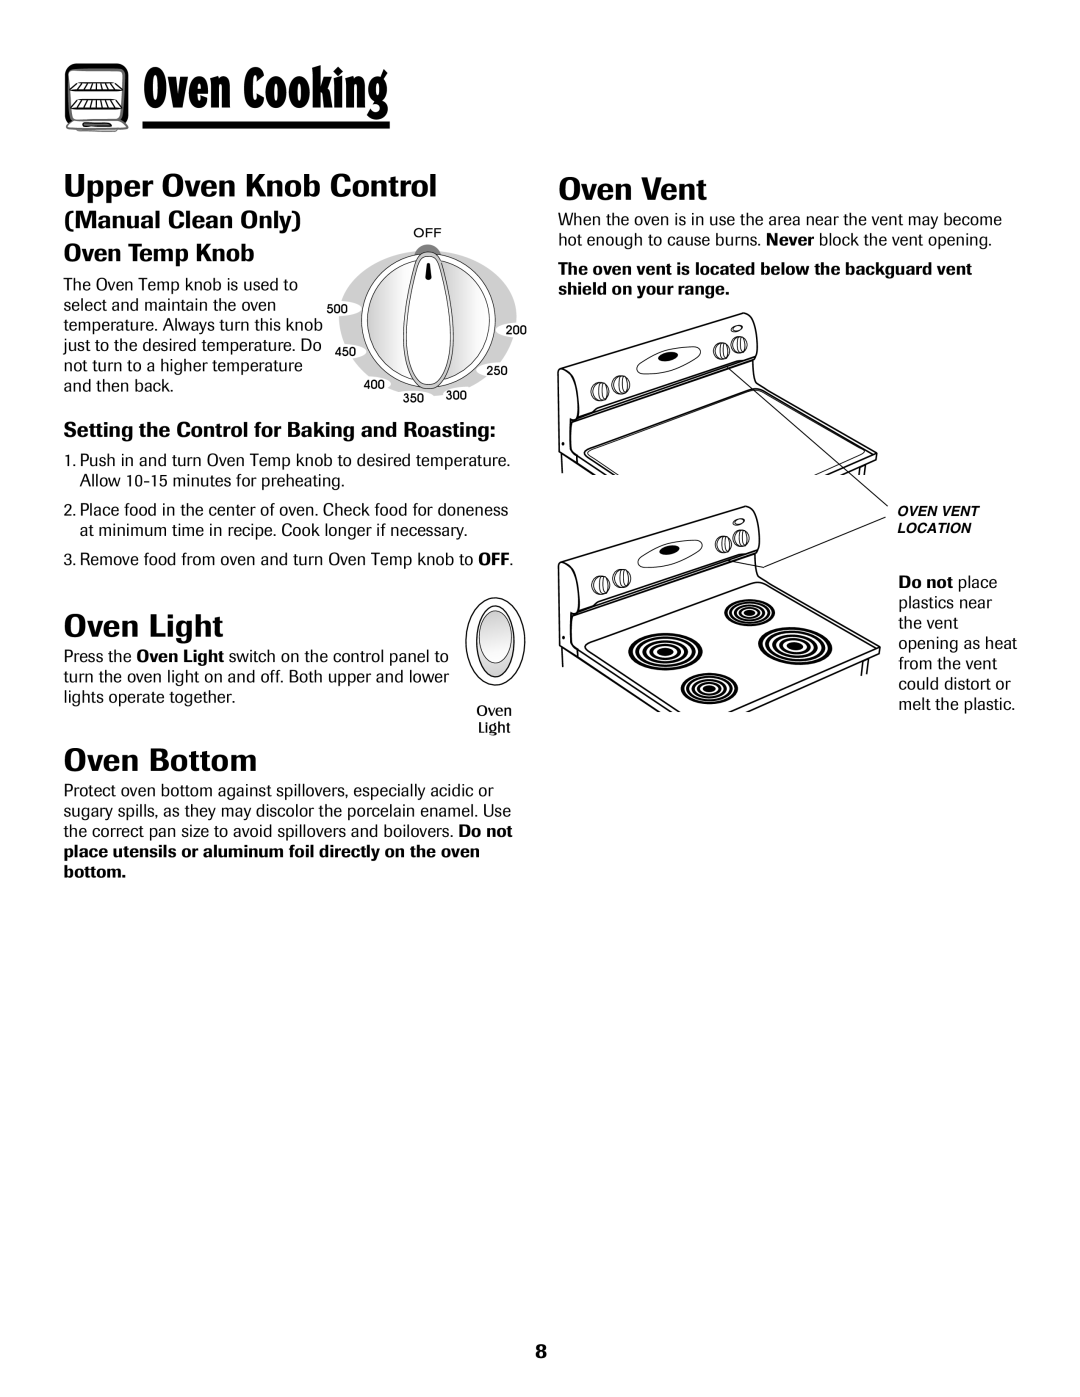 Maytag 500 Series important safety instructions Oven Cooking, Upper Oven Knob Control, Oven Light, Oven Bottom, Oven Vent 